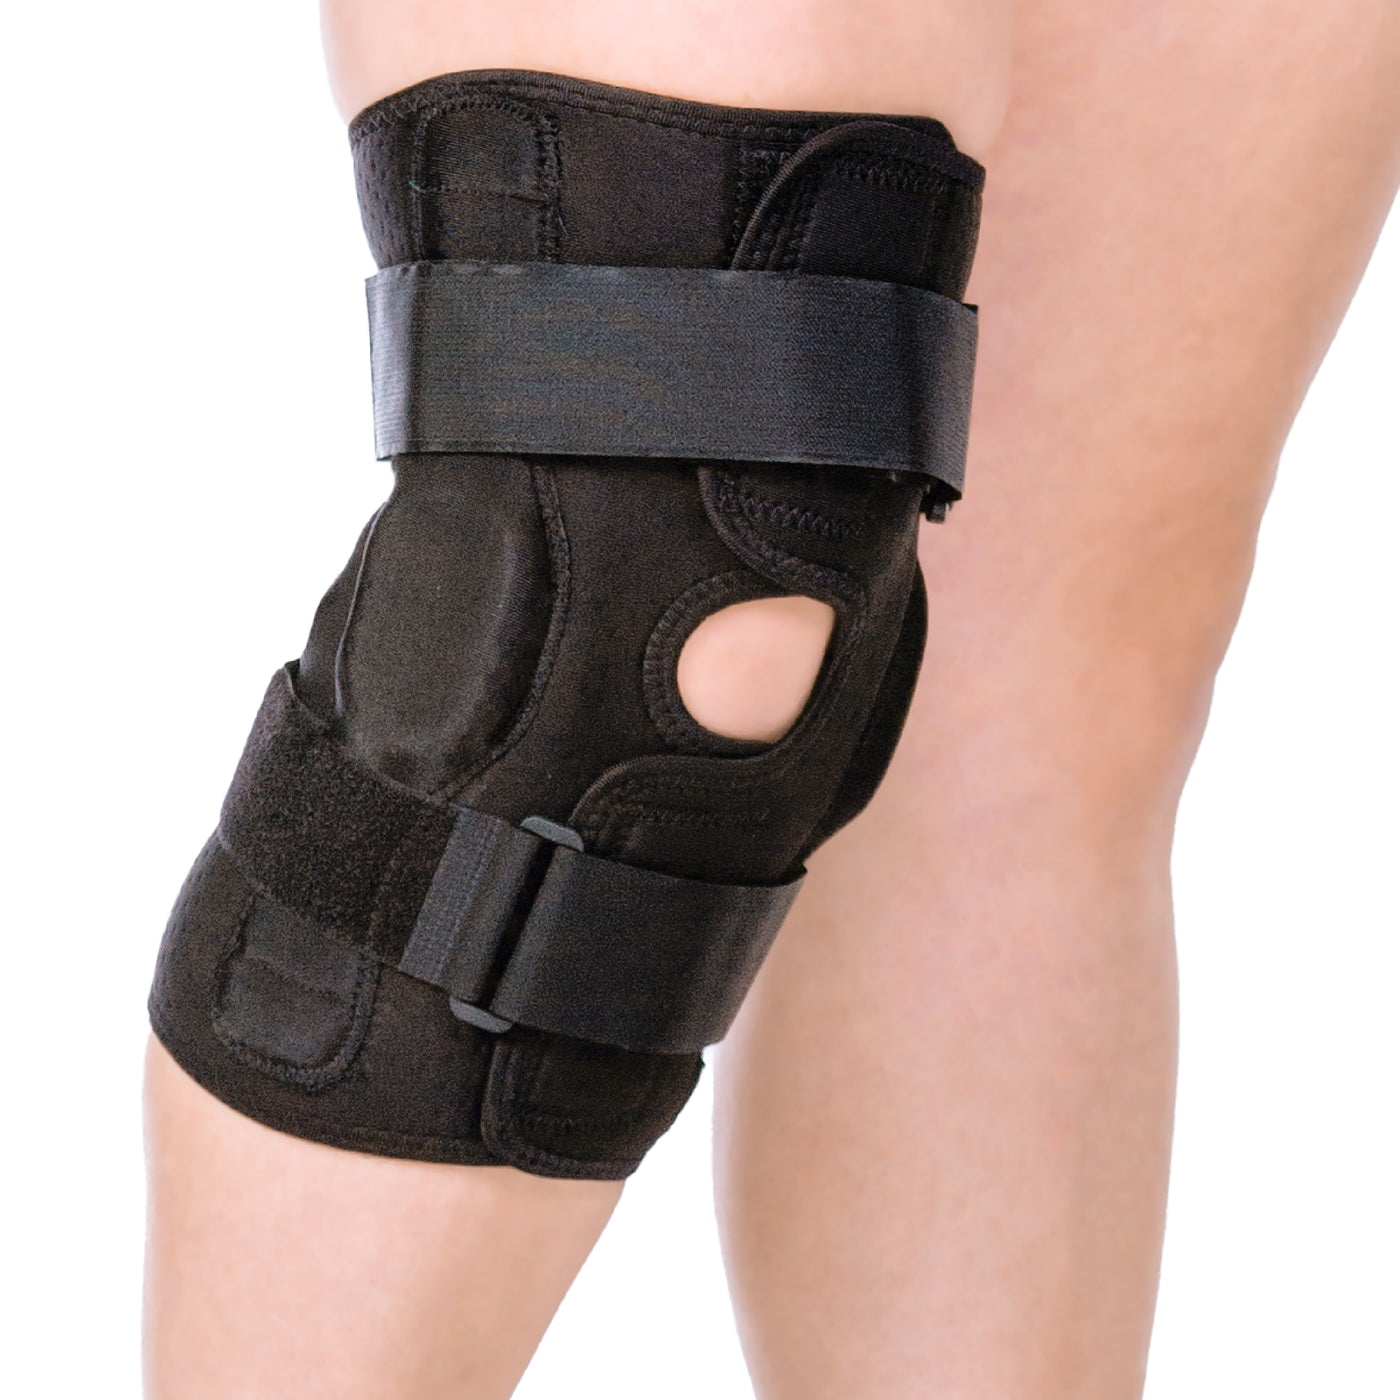 Best Braces For Meniscus (Cartilage) Injury Experts Advice, 40% OFF